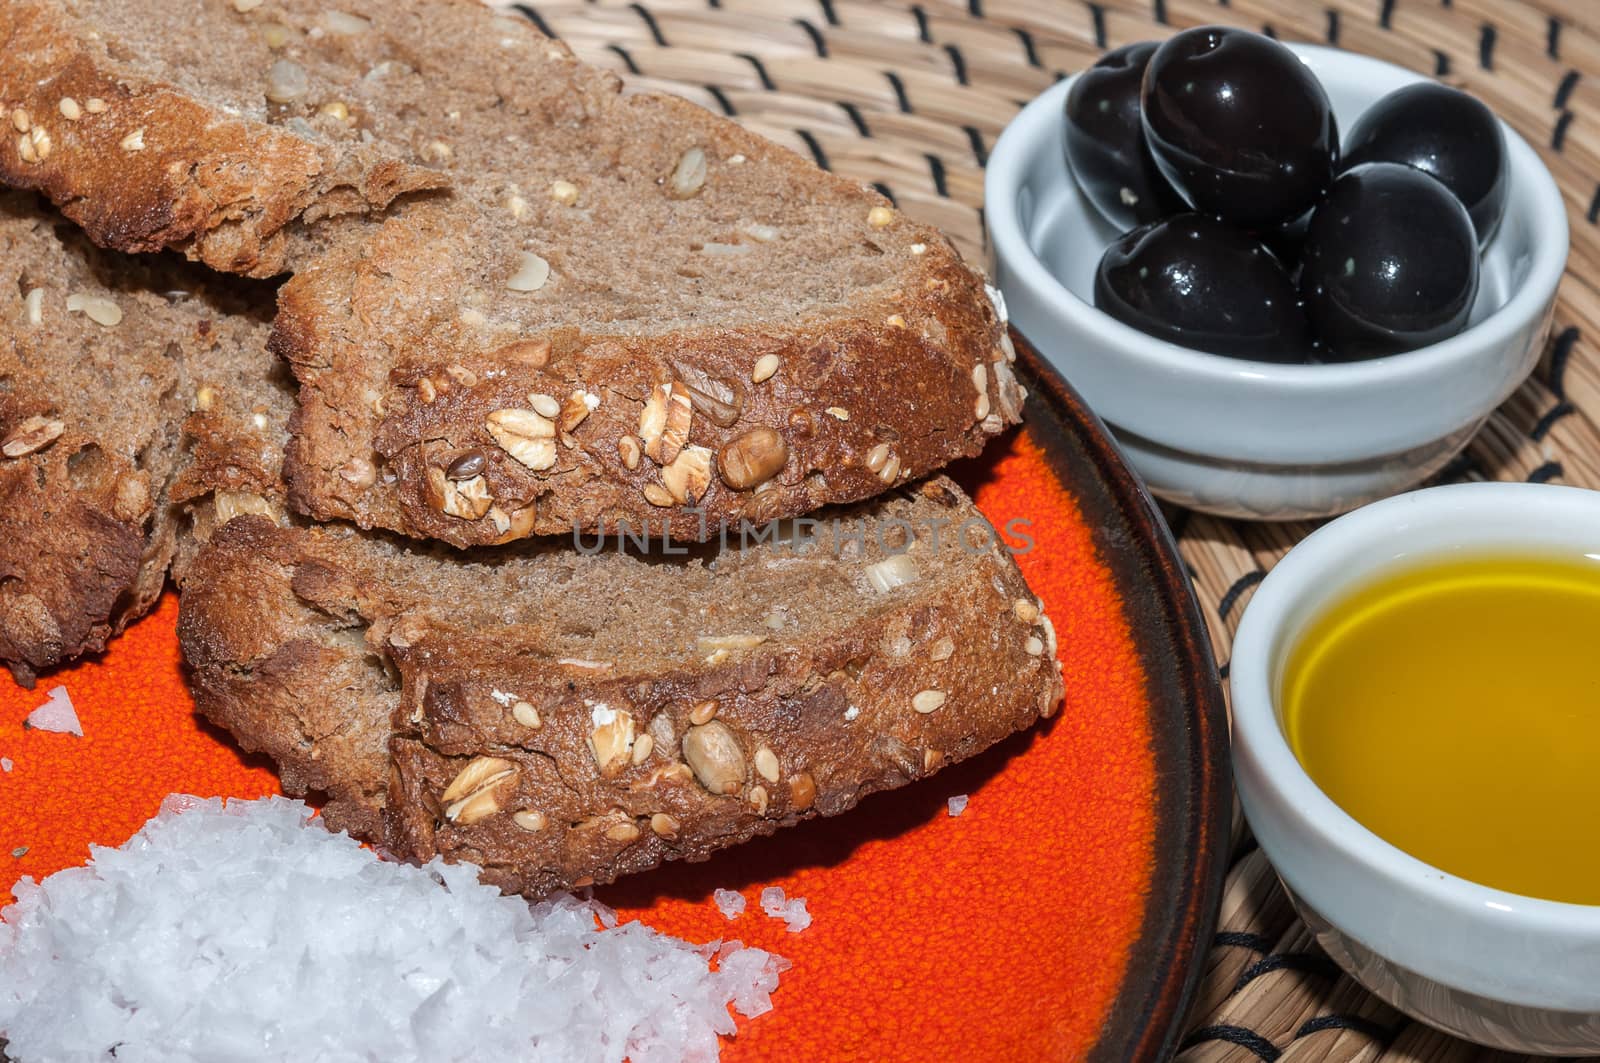 Slices of rye bread with oil, salt and black olives